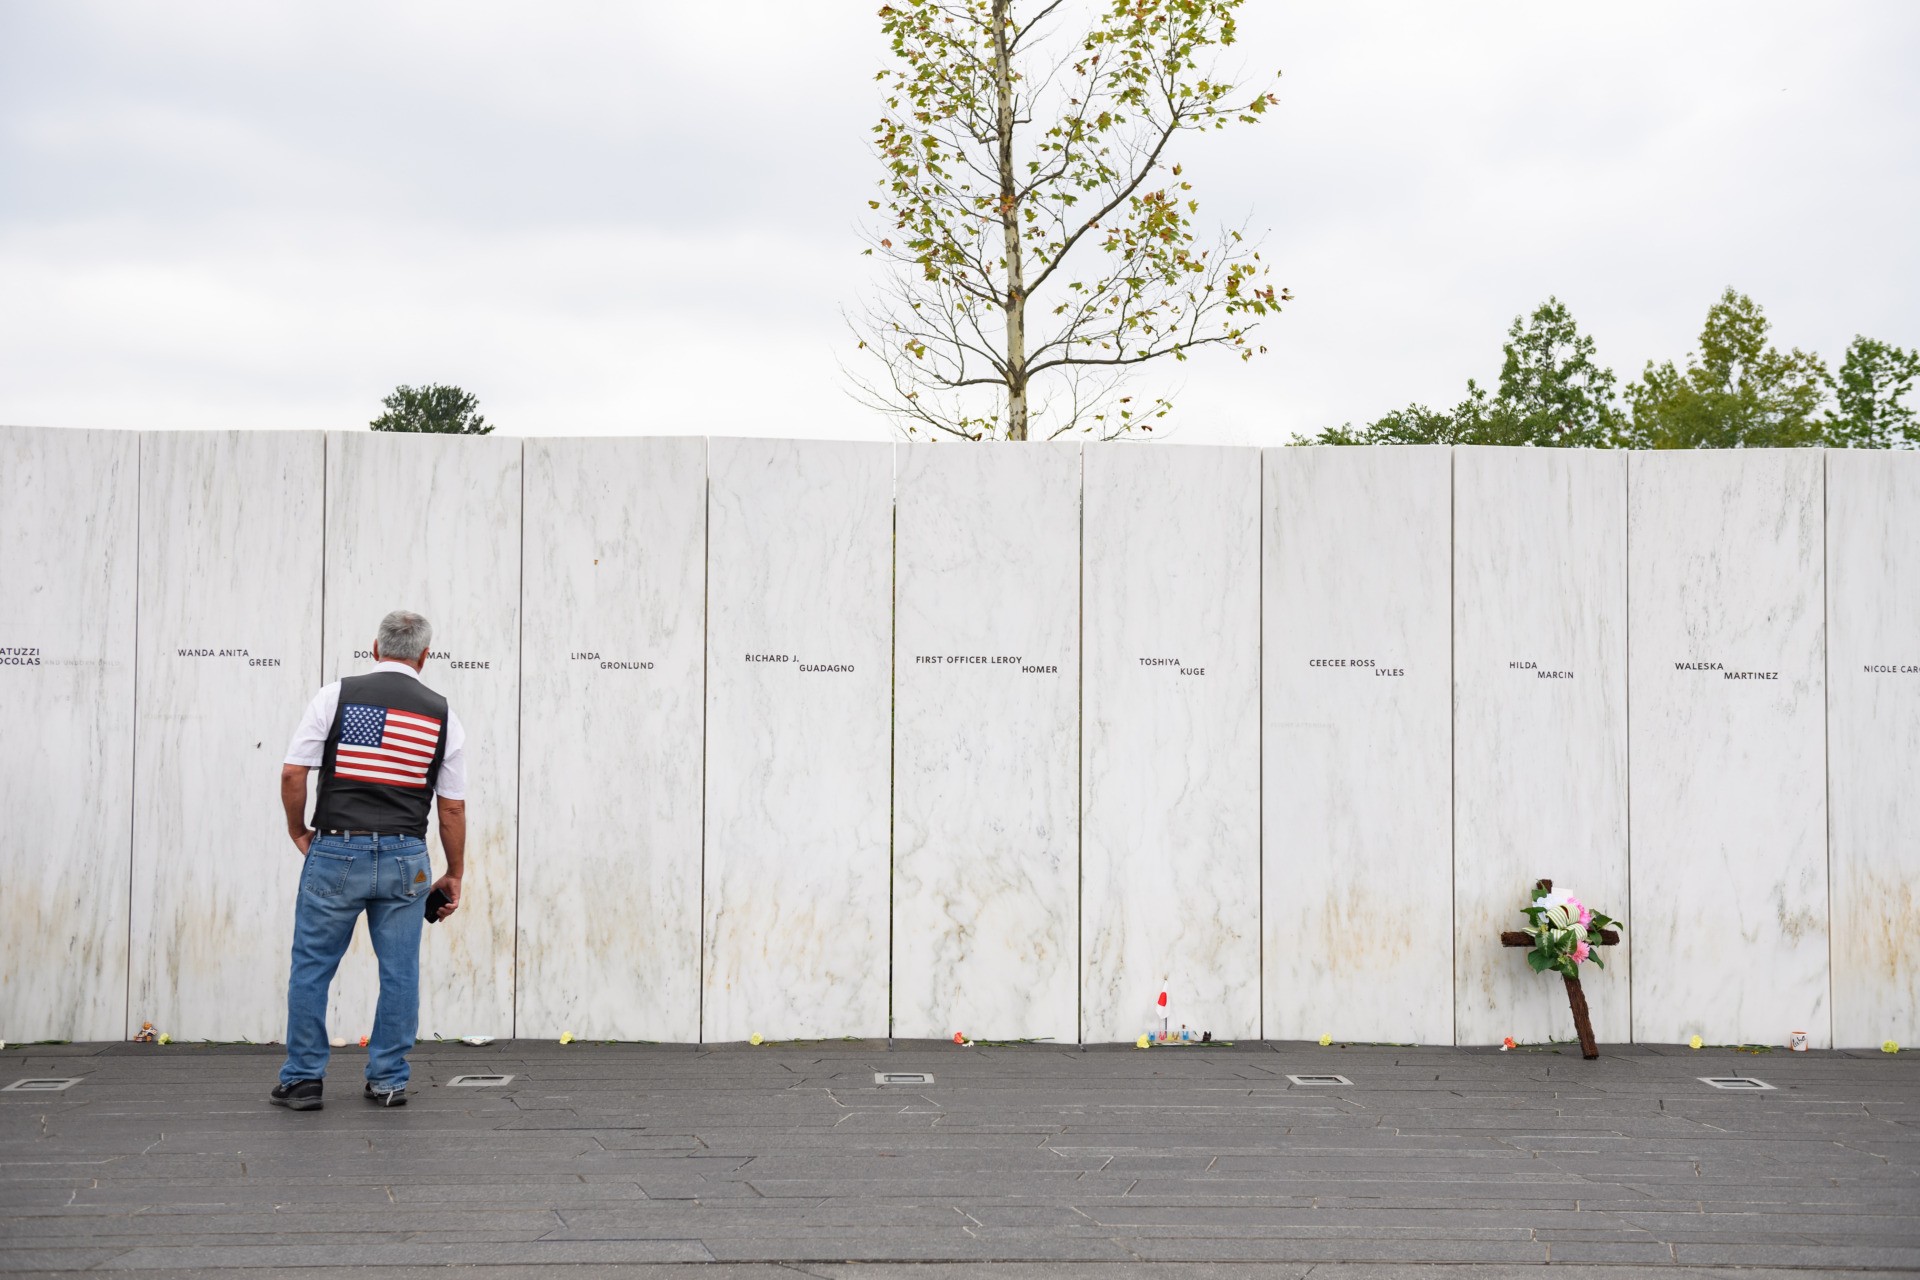 SHANKSVILLE, PA - SEPTEMBER 11:Guests visit the Wall of Names following a ceremony at the Flight 93 National Memorial commemorating the 19th Anniversary of the crash of Flight 93 and the September 11th terrorist attacks on September 11, 2020 in Shanksville, Pennsylvania. The nation is marking the nineteenth anniversary of the terror attacks of September 11, 2001, when the terrorist group al-Qaeda flew hijacked airplanes into the World Trade Center and the Pentagon, killing nearly 3,000 people. (Photo by Jeff Swensen/Getty Images)